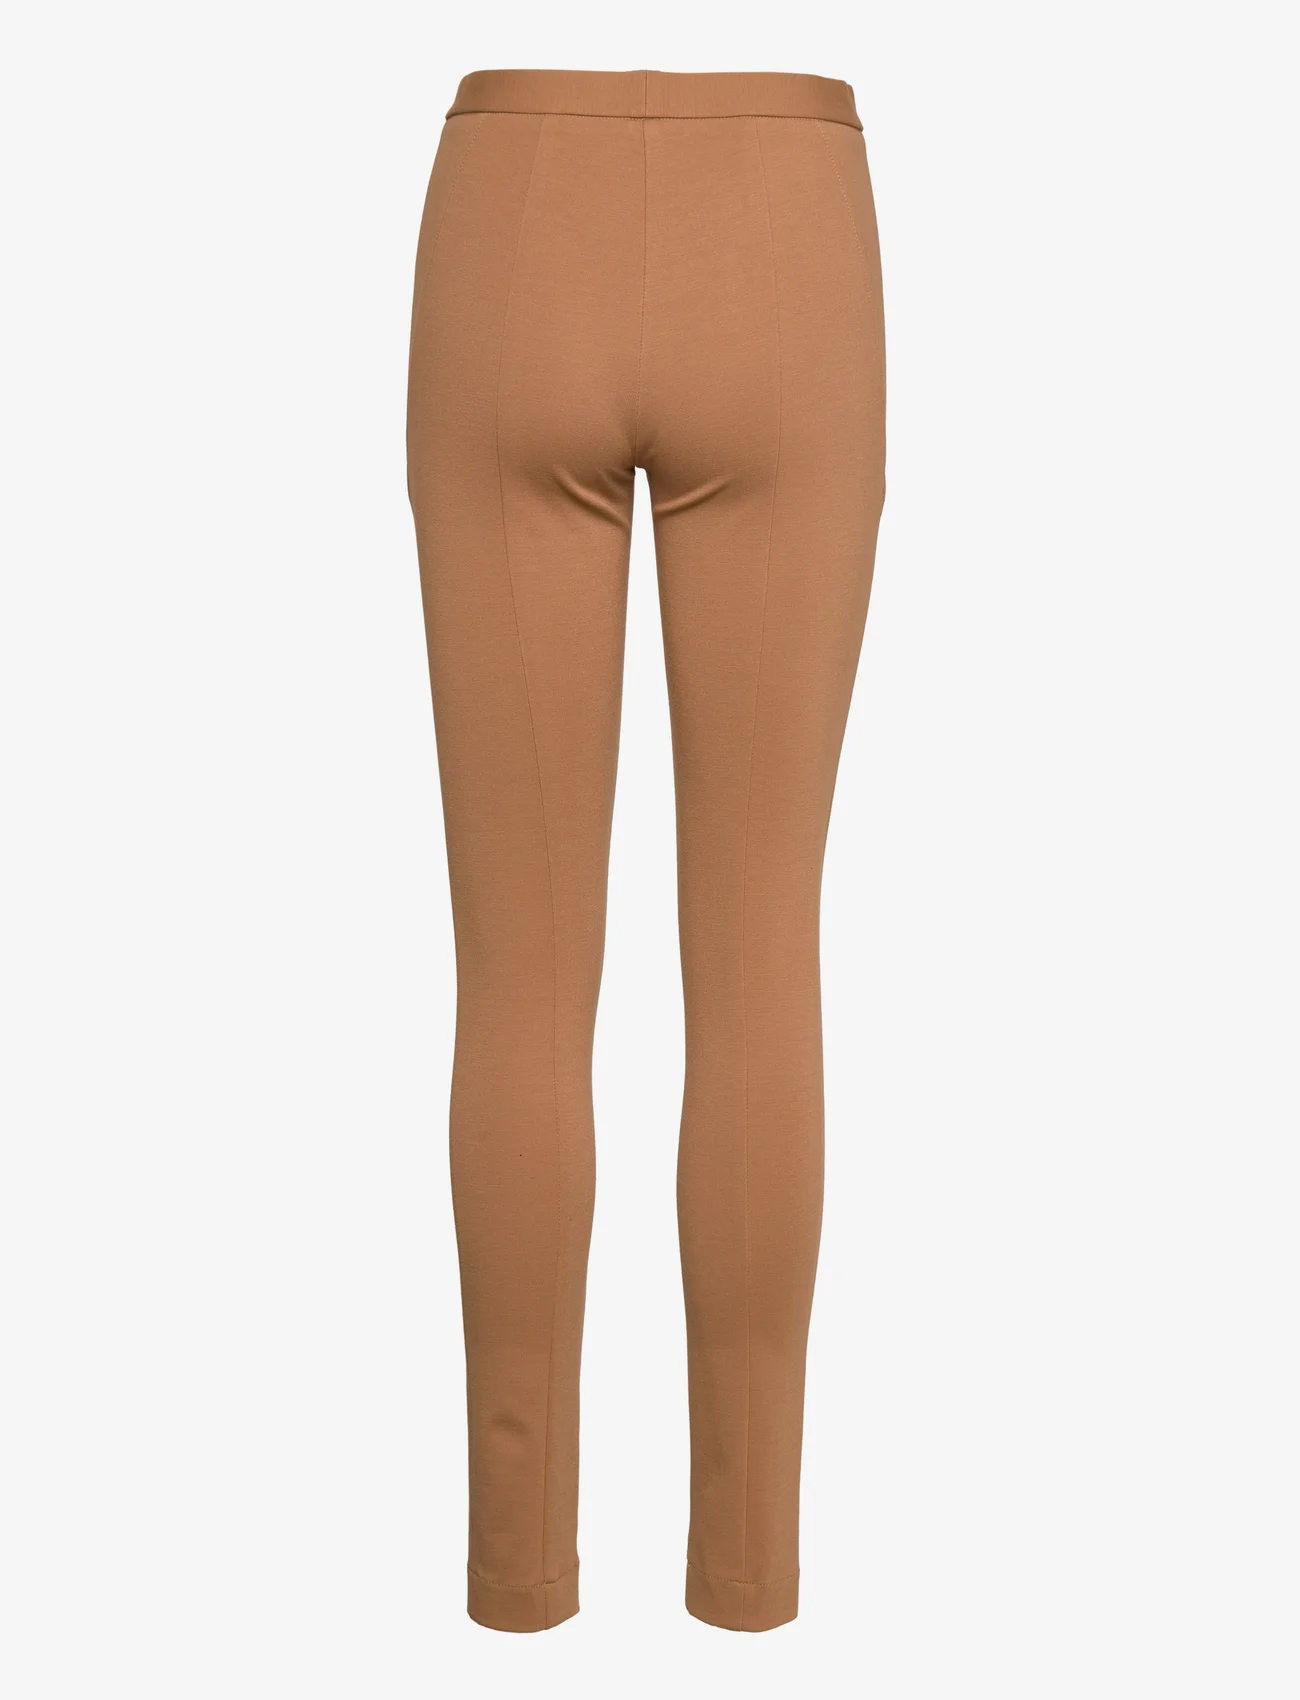 Andiata - Nomi Jersey Pants - trousers with skinny legs - tan beige - 1